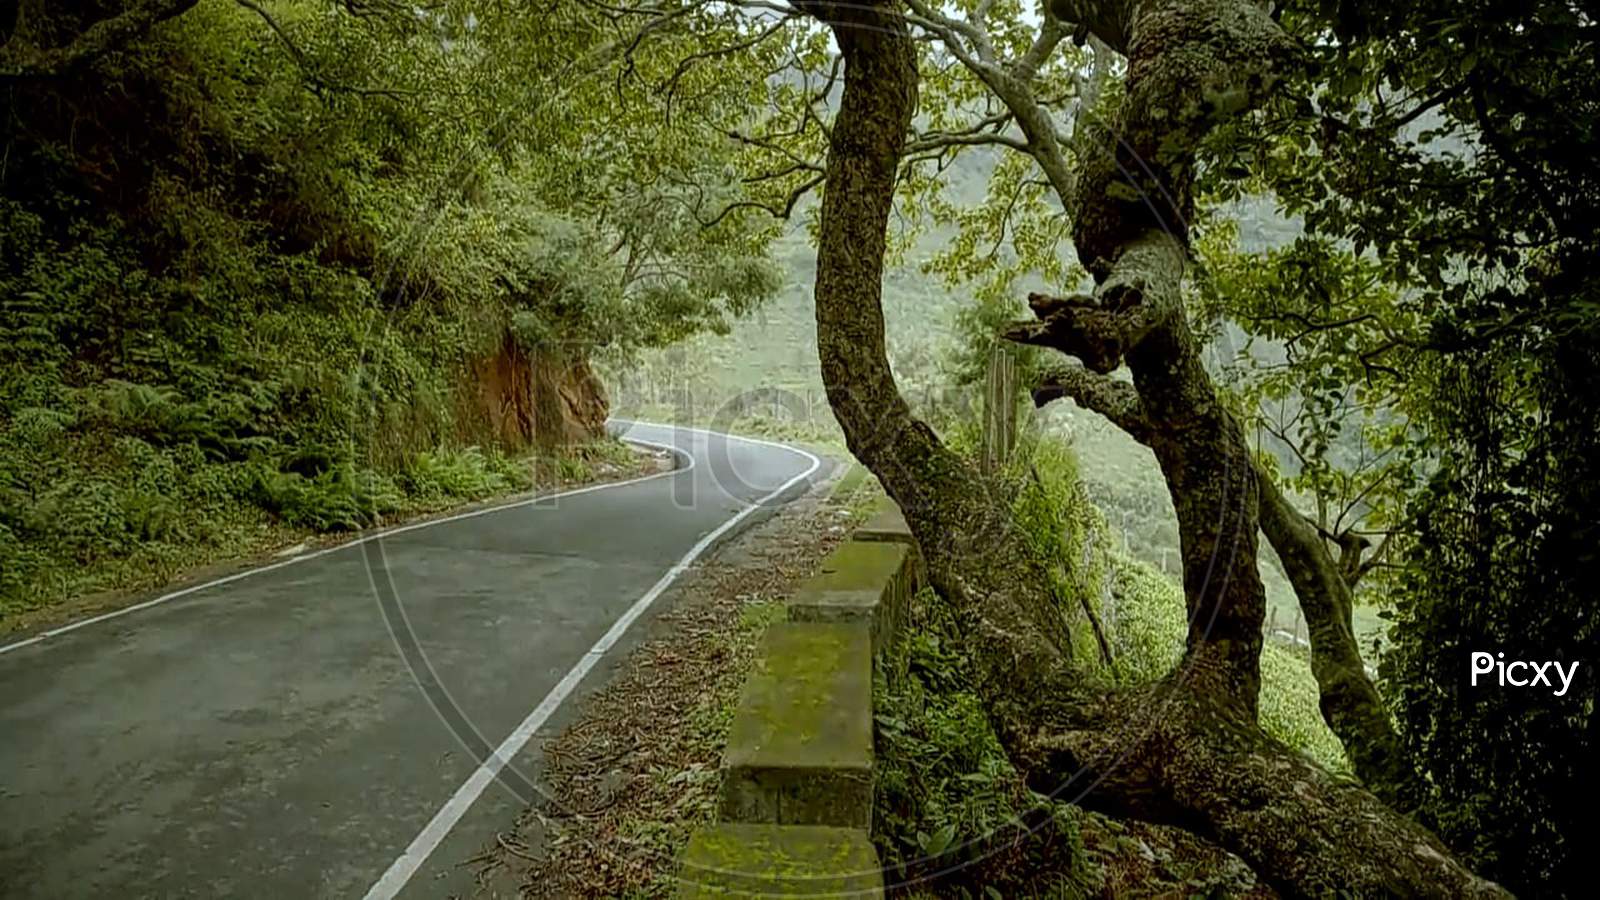 Road going between forest